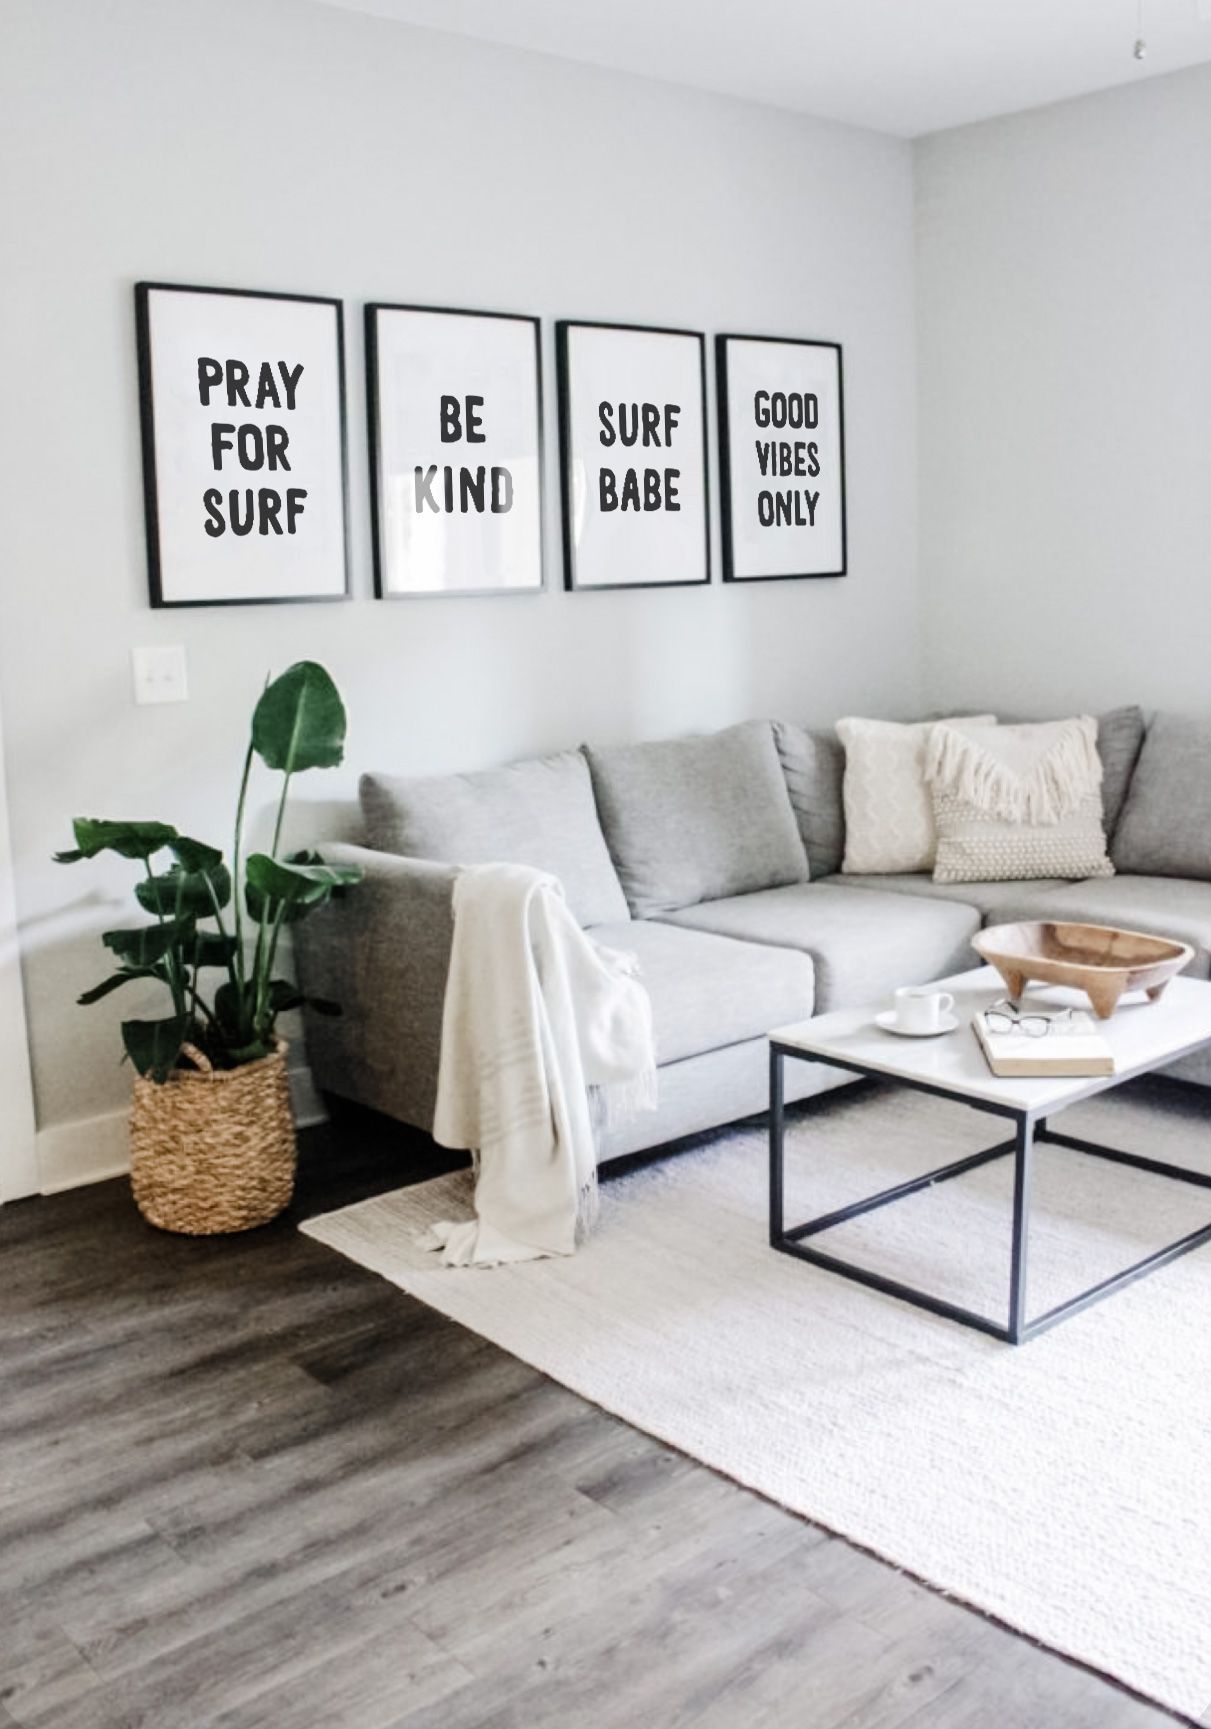 pray for surf, be kind, surf babe, good vibes only, grey living room coastal living decor ideas - pray for surf, be kind, surf babe, good vibes only, grey living room coastal living decor ideas -   home decor for cheap living room